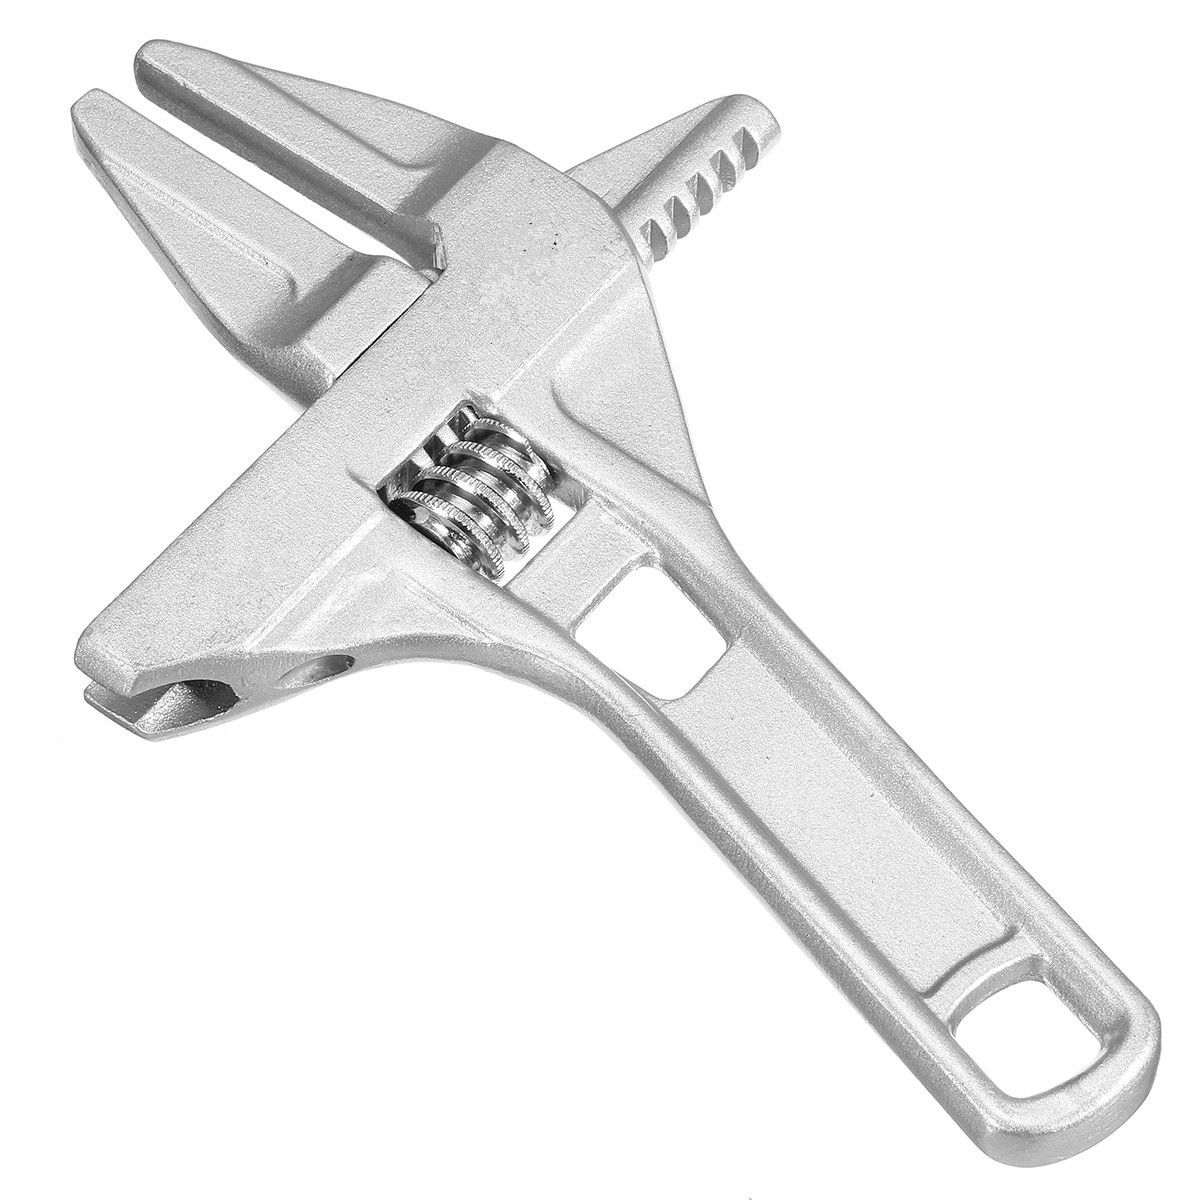 200mm-Mini-Small-Adjustable-Spanner-Wrench-Short-Shank-Large-Openings-Ultra-Thin-1068388-3